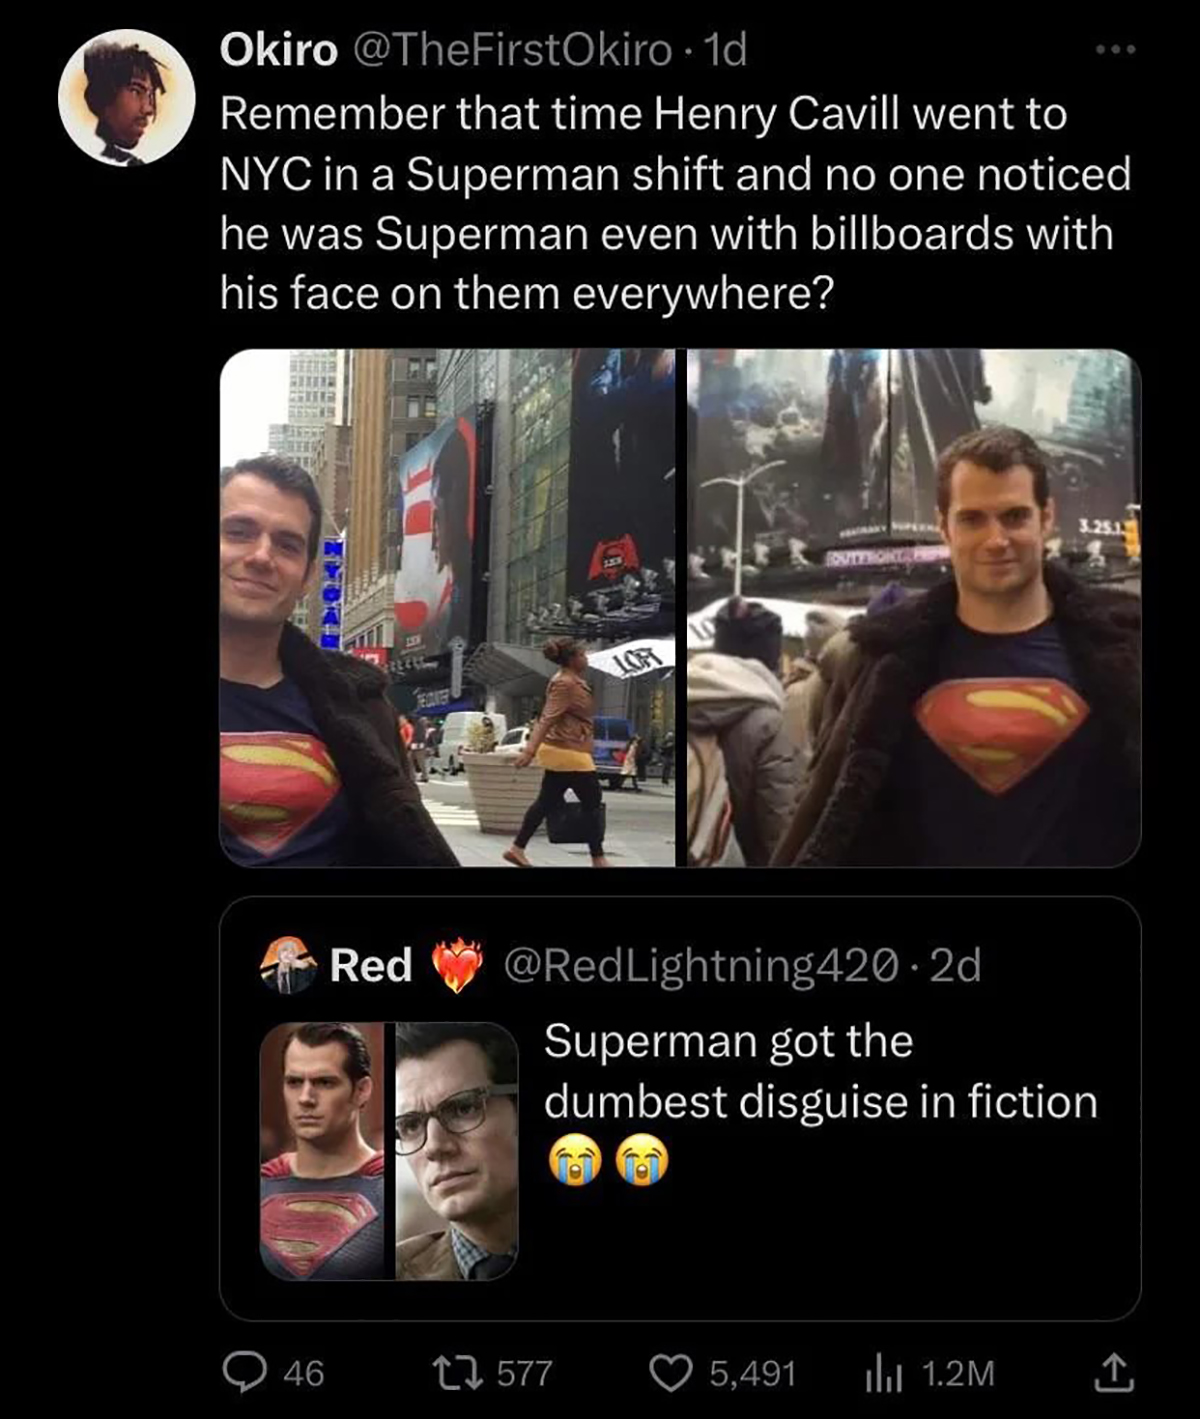 screenshot - Okiro . 1d Remember that time Henry Cavill went to Nyc in a Superman shift and no one noticed he was Superman even with billboards with his face on them everywhere? O 46 Red Lor Superman got the dumbest disguise in fiction 13 577 5,491 il 1.2